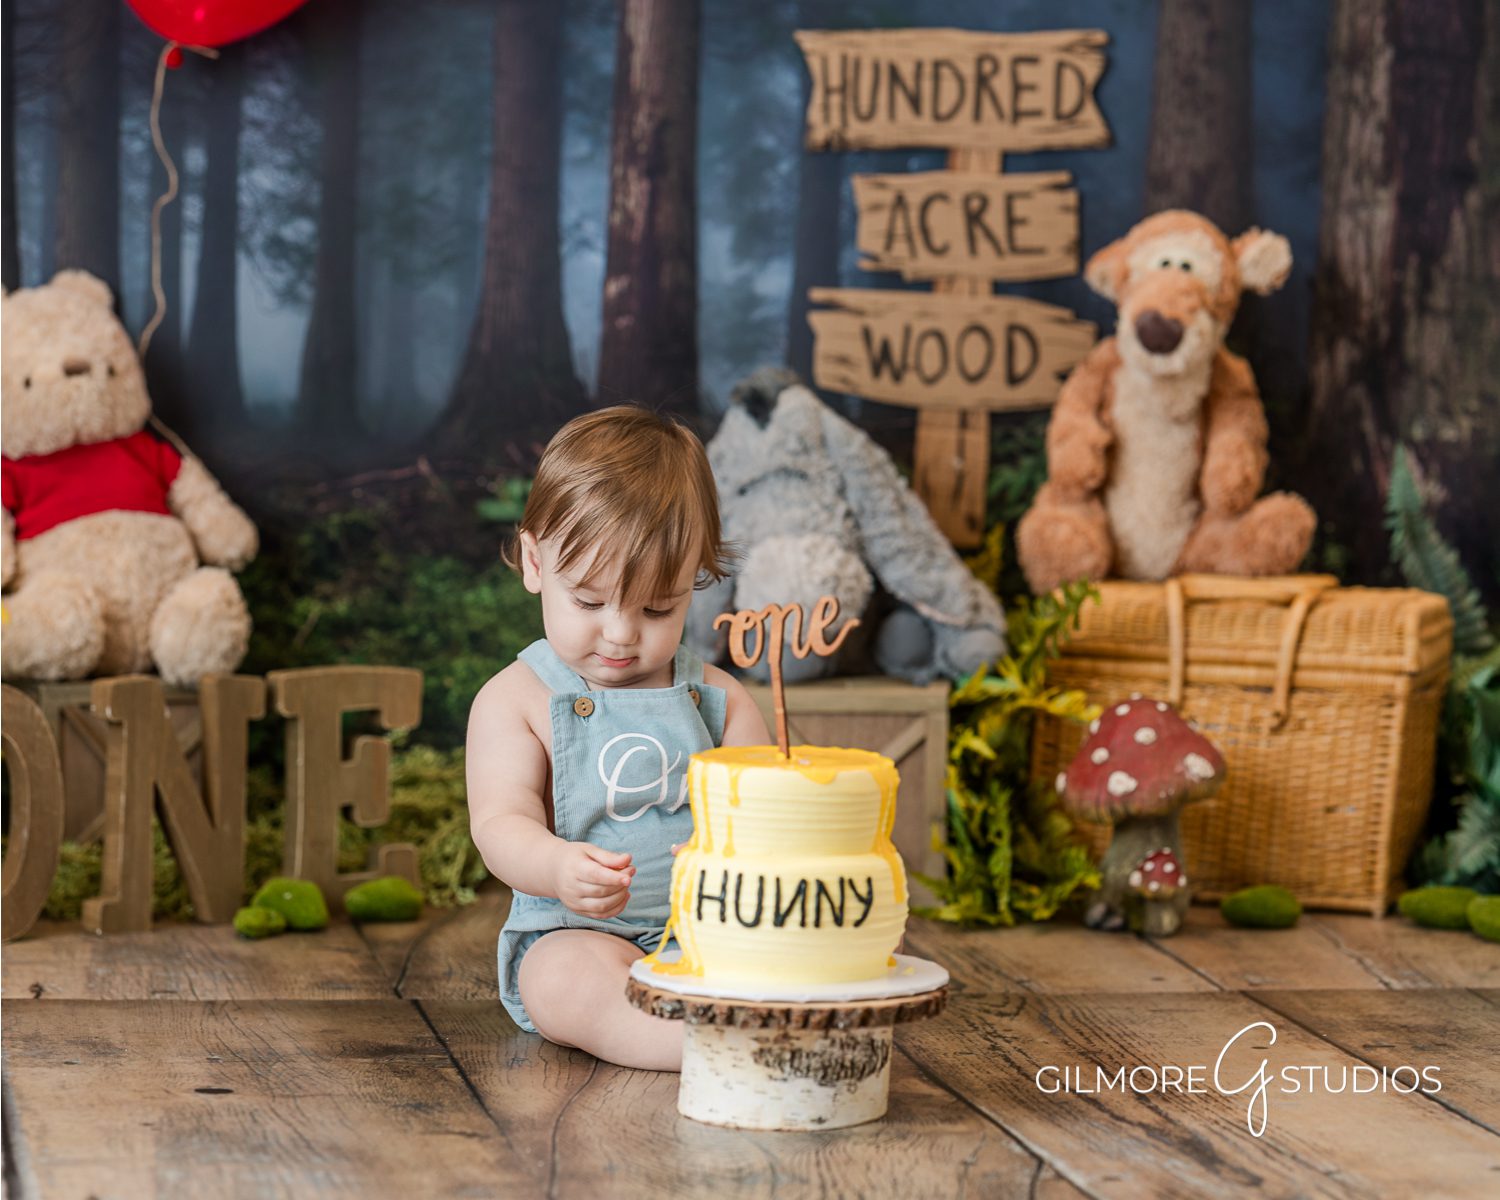 winnie the pooh cake smash, winnie the pooh theme, hundred acre wood, pooh bear, tigger, piglet, honey, hunny, custom cake, one year old, first birthday, christopher robin, when we were very young, e. h. shepard, the house at pooh corner, photographer, photo, photography set design, red balloon, birthday party